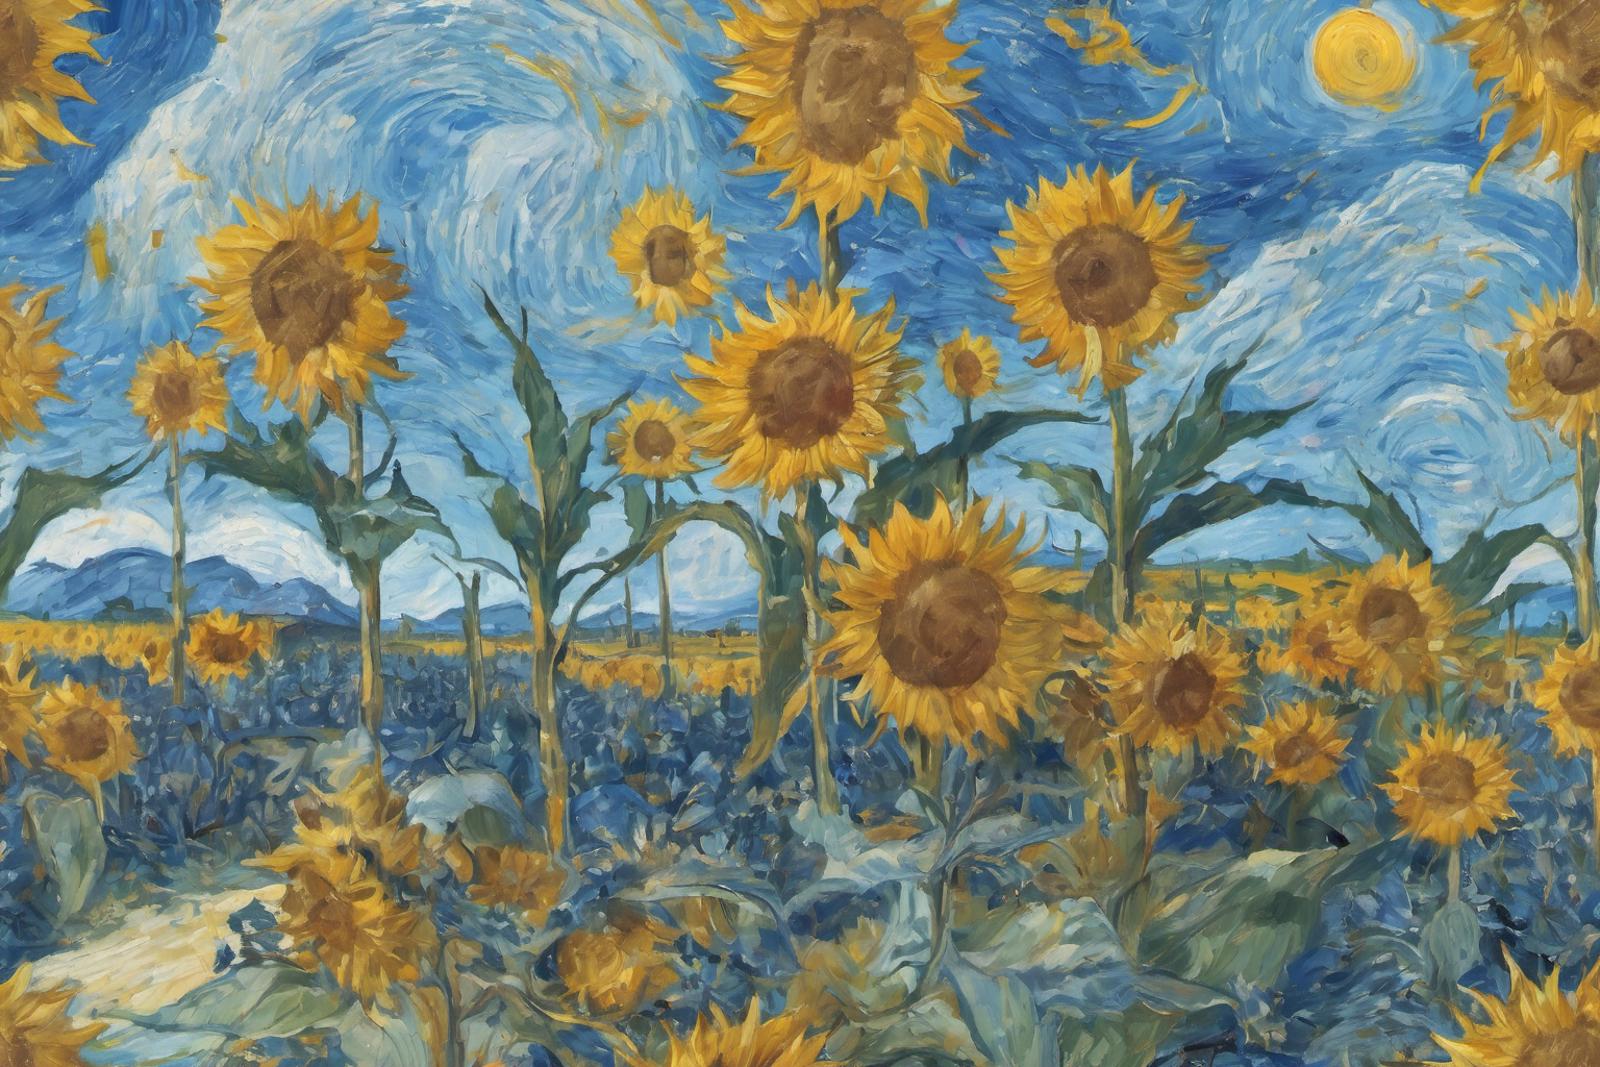 A painting of a field of sunflowers with a blue sky and clouds.